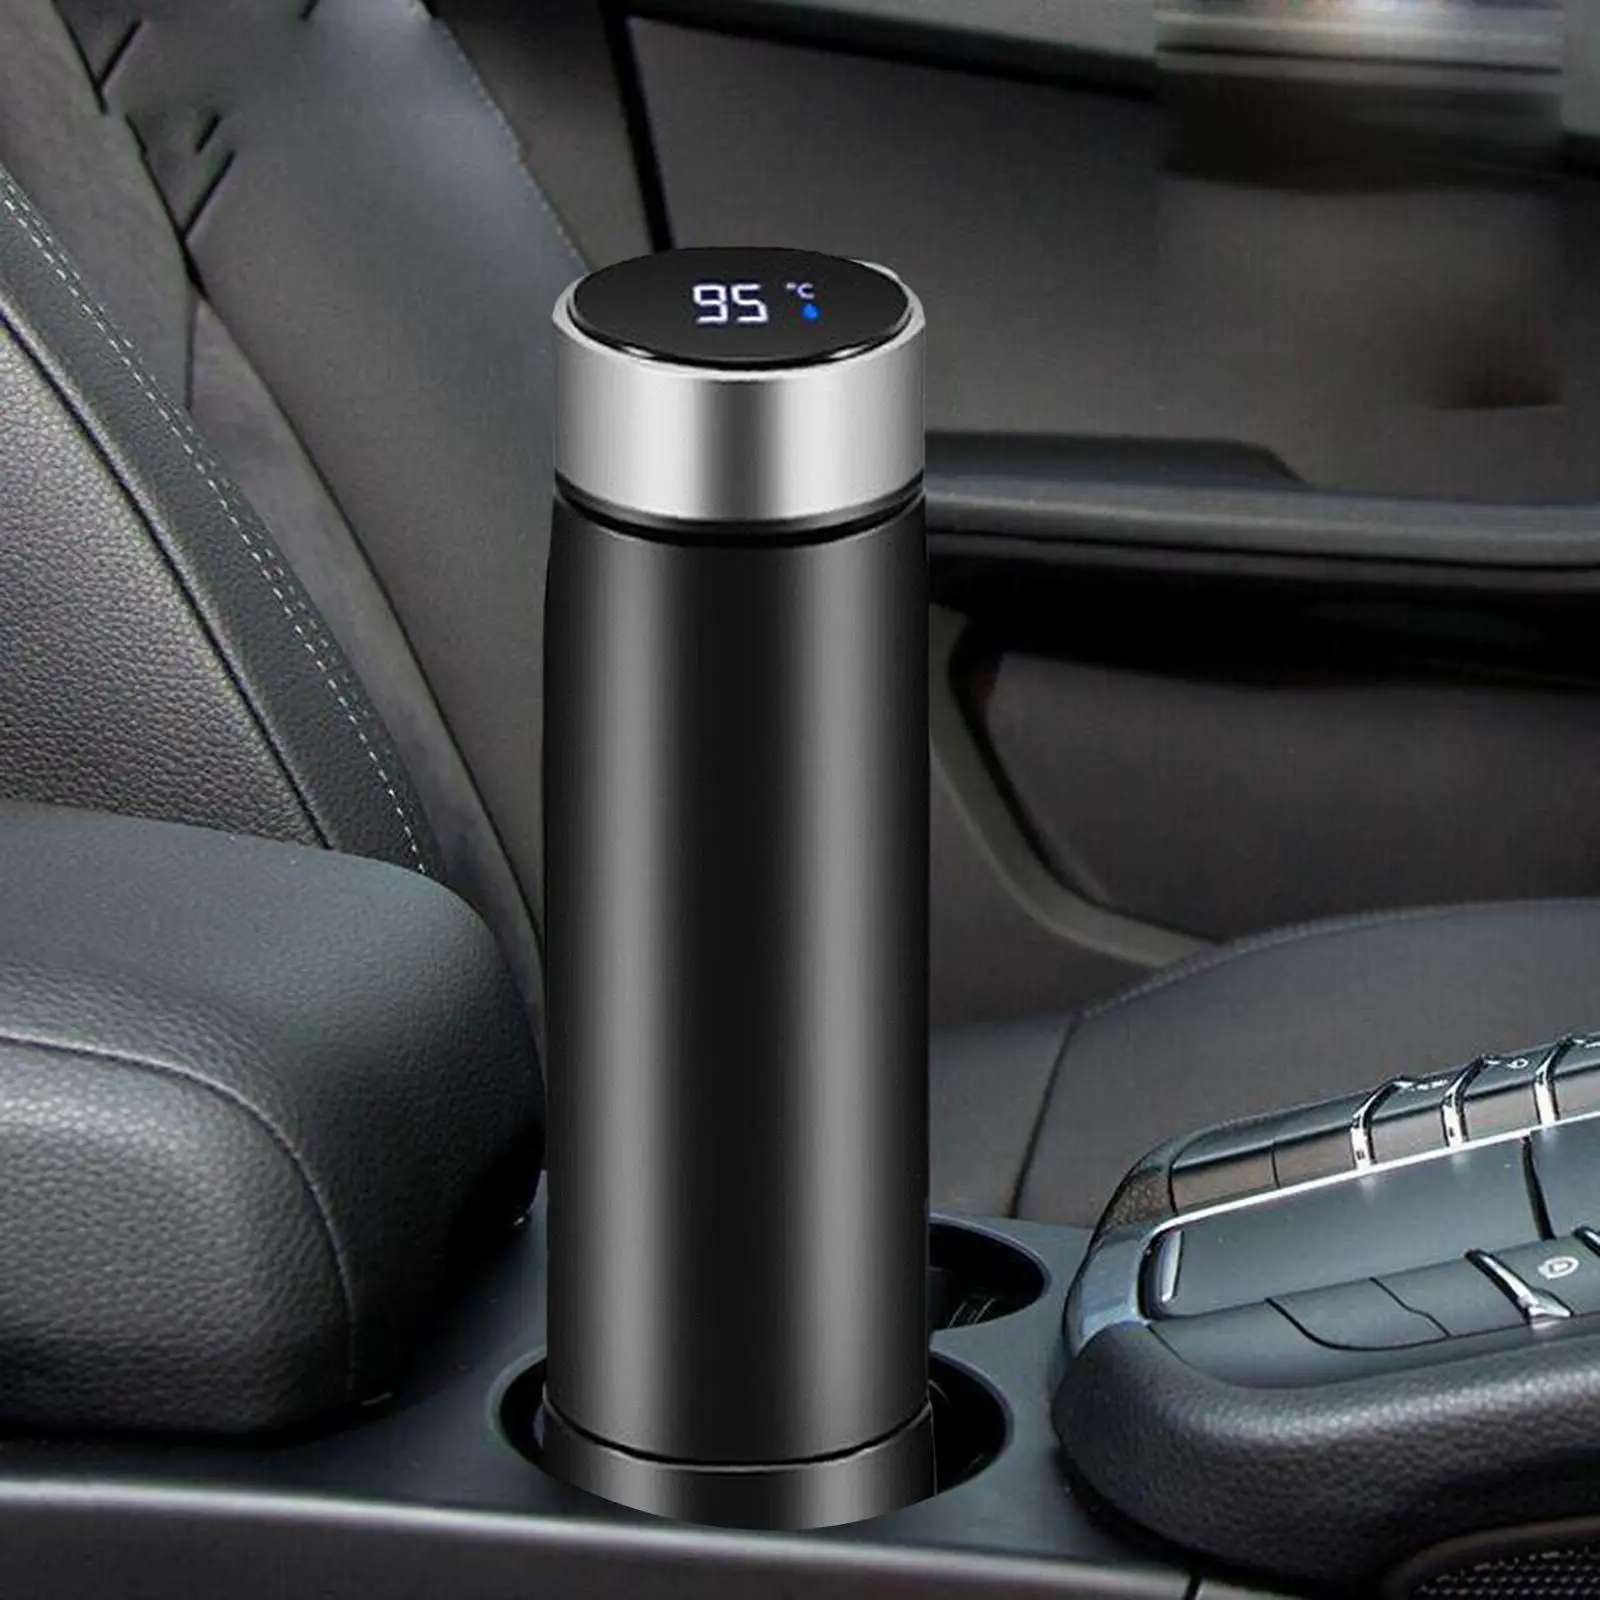 12V 24V Car Heating Cup Smart Car Bottle Warmer LCD Display Insulated Cup Heater Electric Heated Travel Mug for Keep Warm Travel